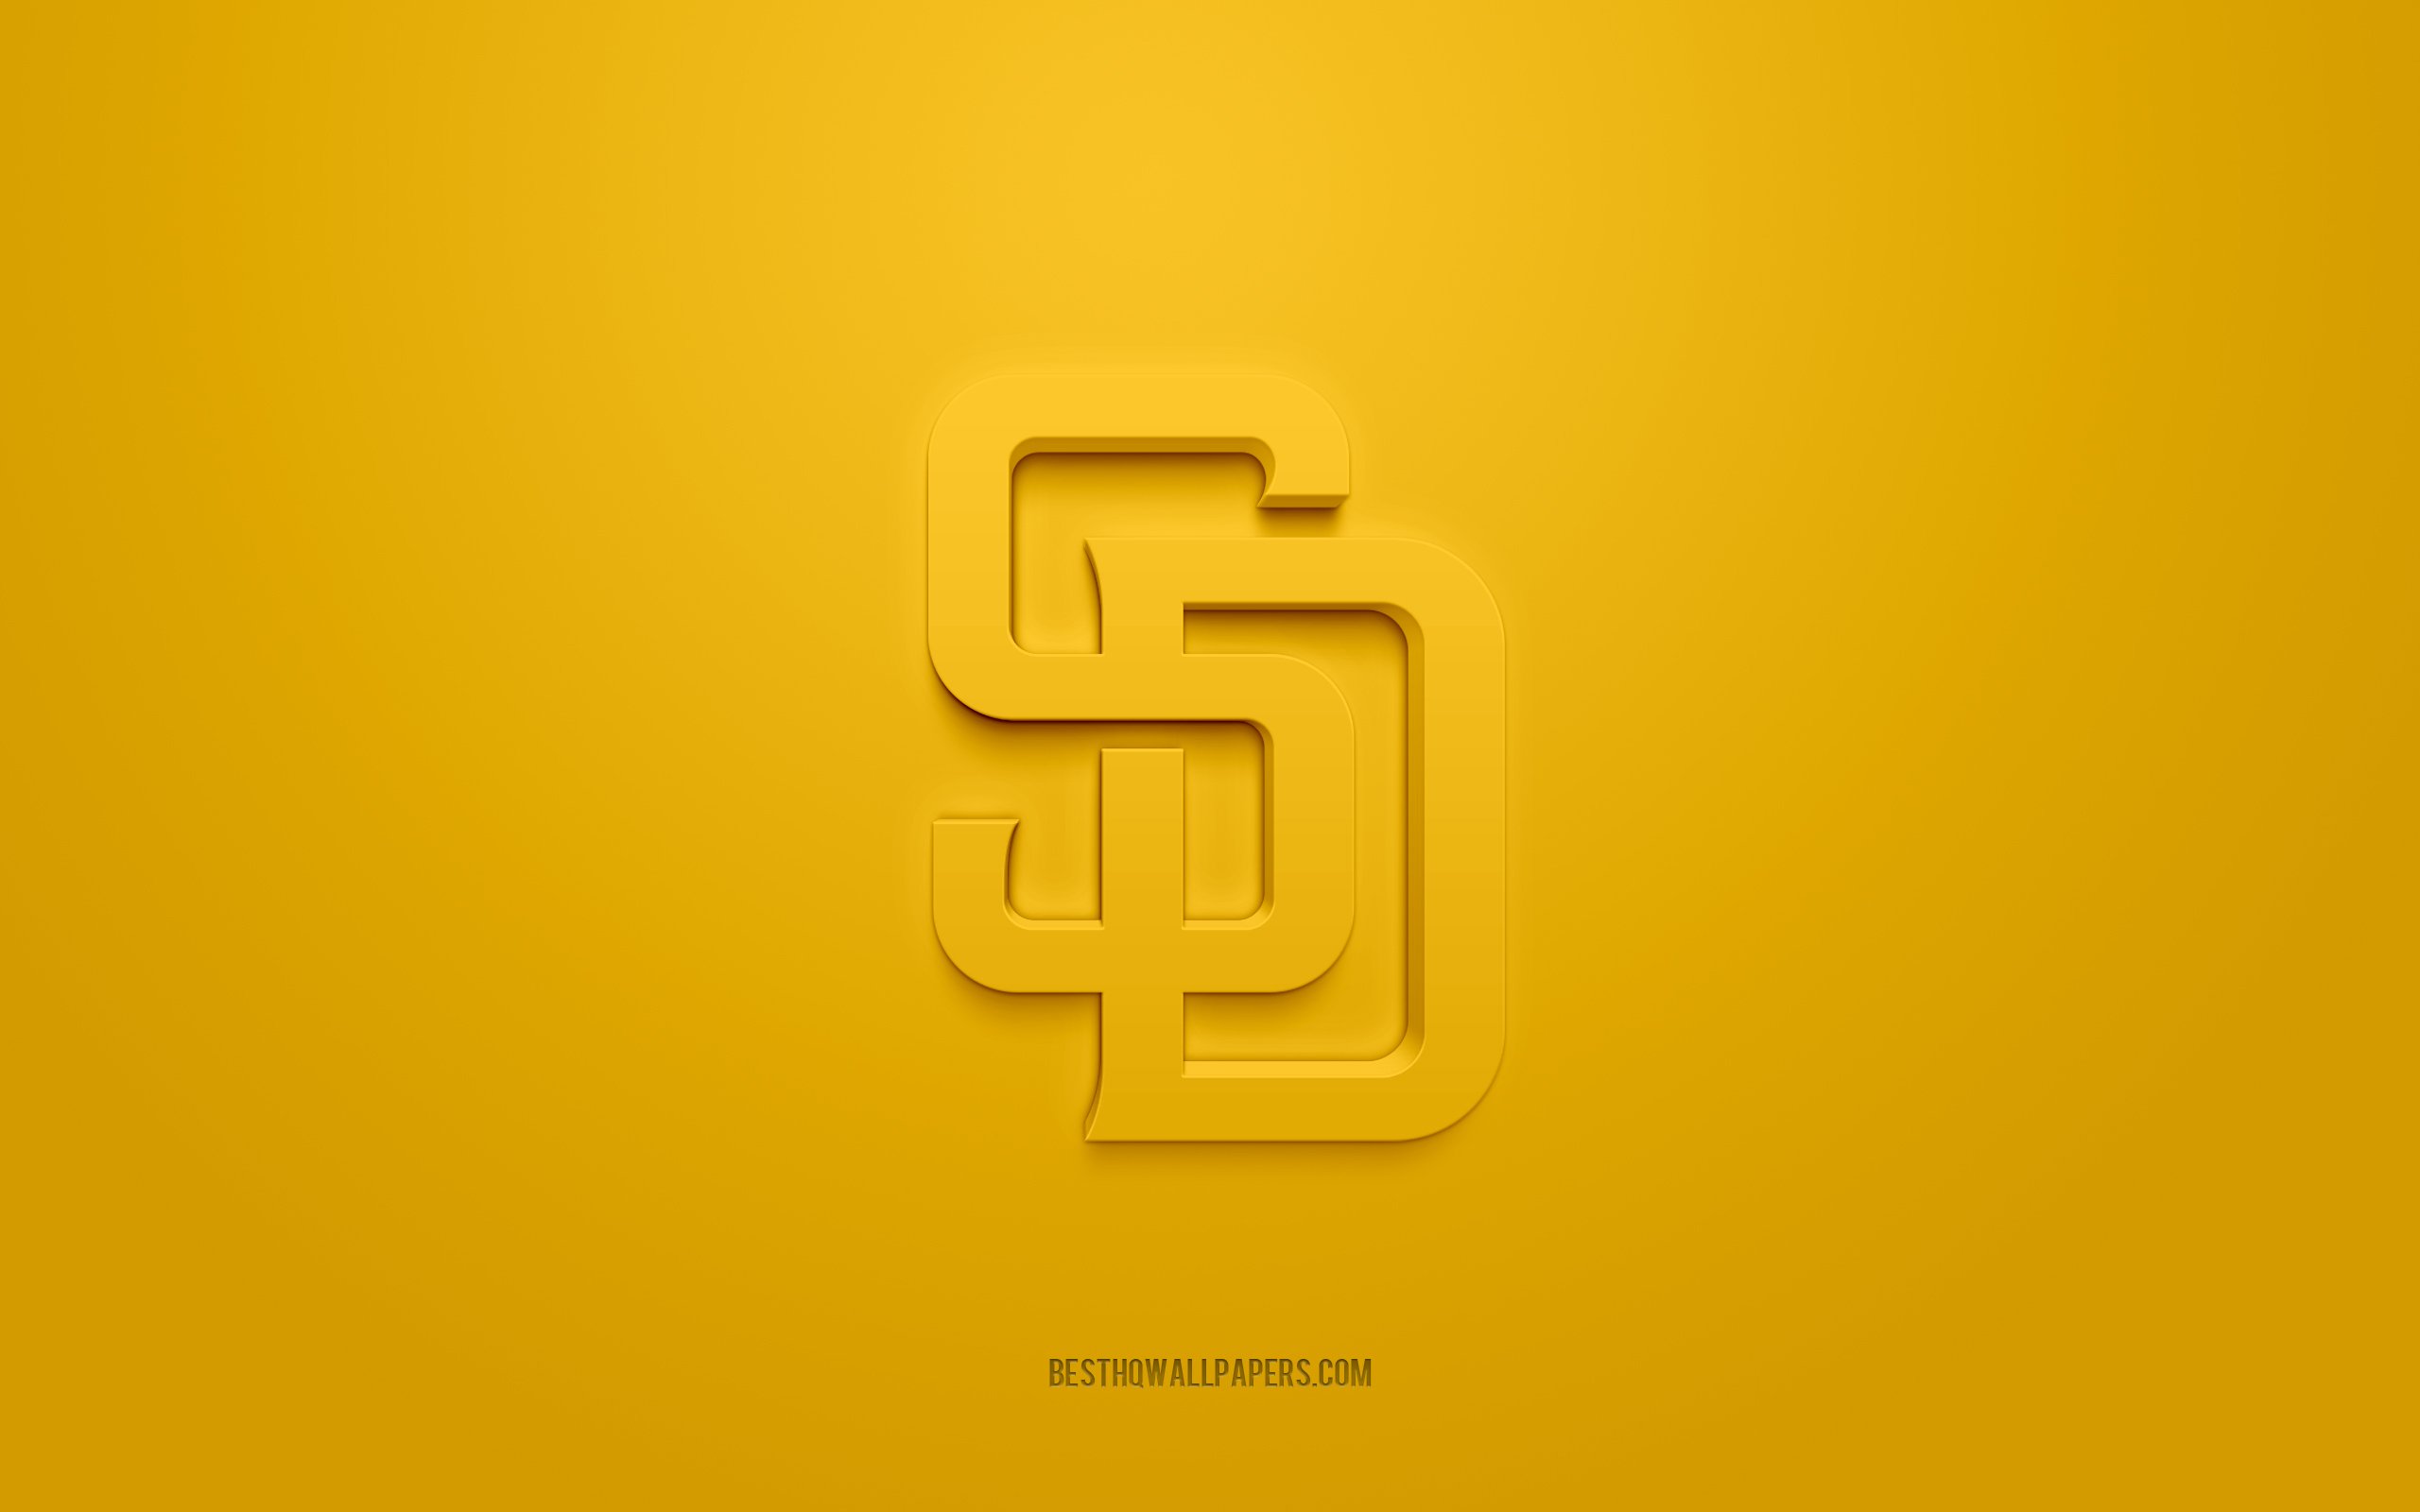 San Diego Padres Wallpaper 57 images